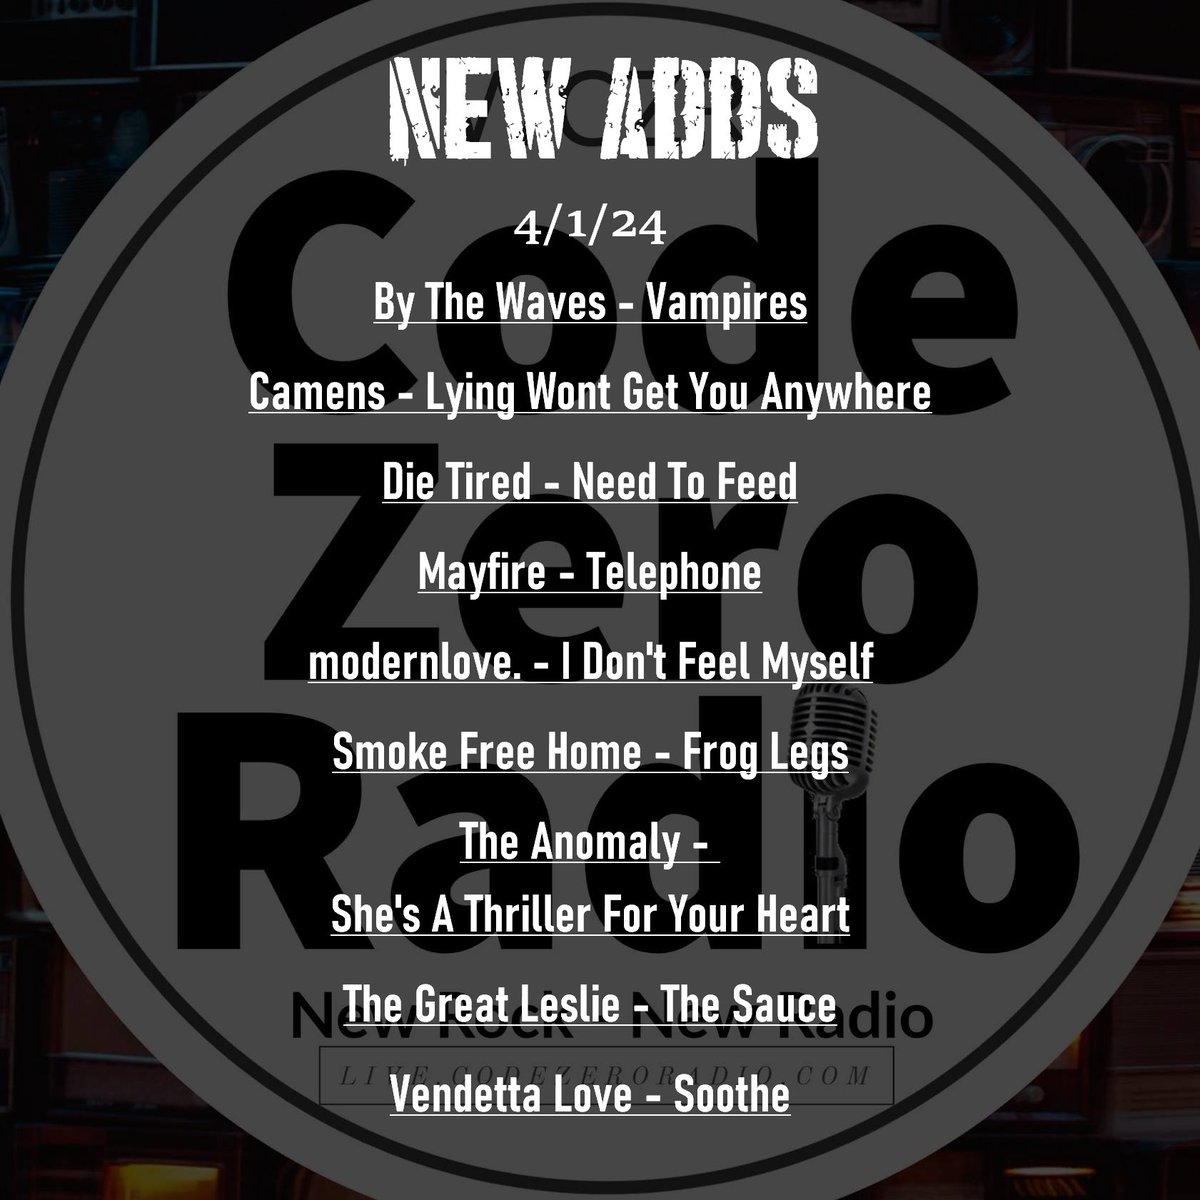 Oops! Updated graphic to include @DieTiredBand More shiny new music headed for your earholes!Now in rotation and featured on Fresh Rocks, weekdays at 1 pm CDT/ 7 pm GMT Curated for your discovery! #appstore #streaming #iPhone #Nobex #android #alternative #rock #app